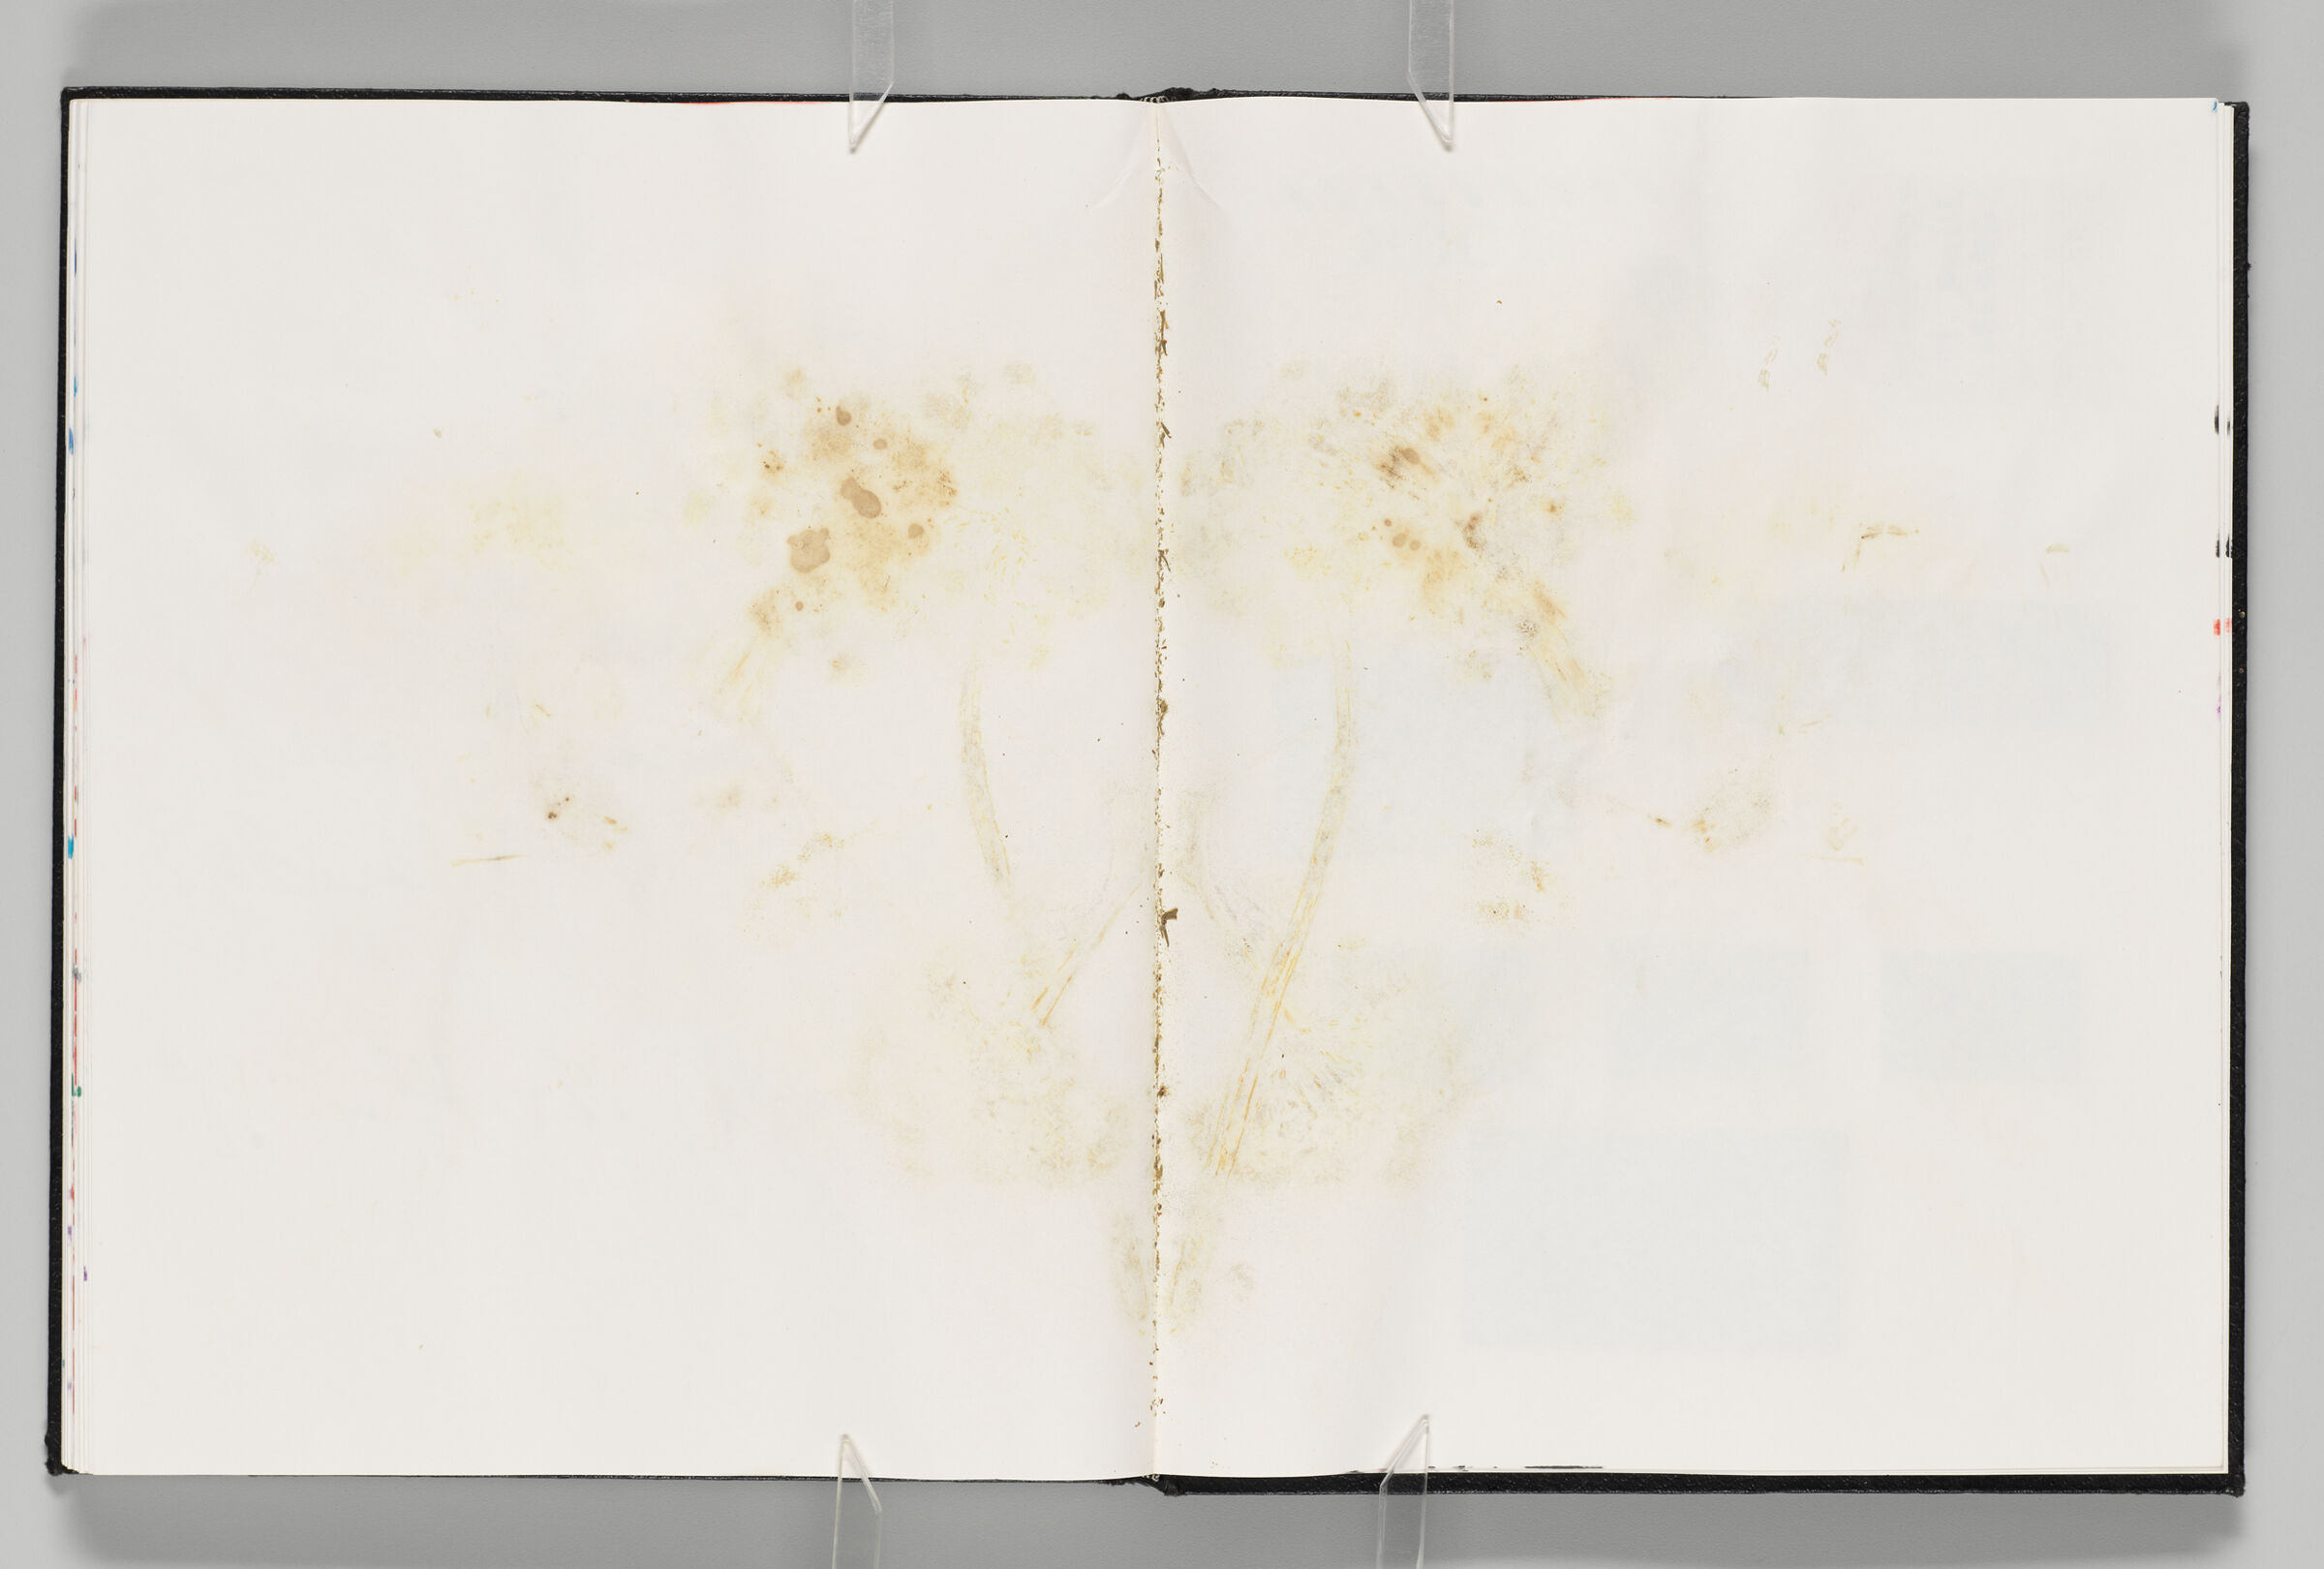 Untitled (Blank With Flower Stains, Left Page); Untitled (Blank With Flower Stains, Right Page)